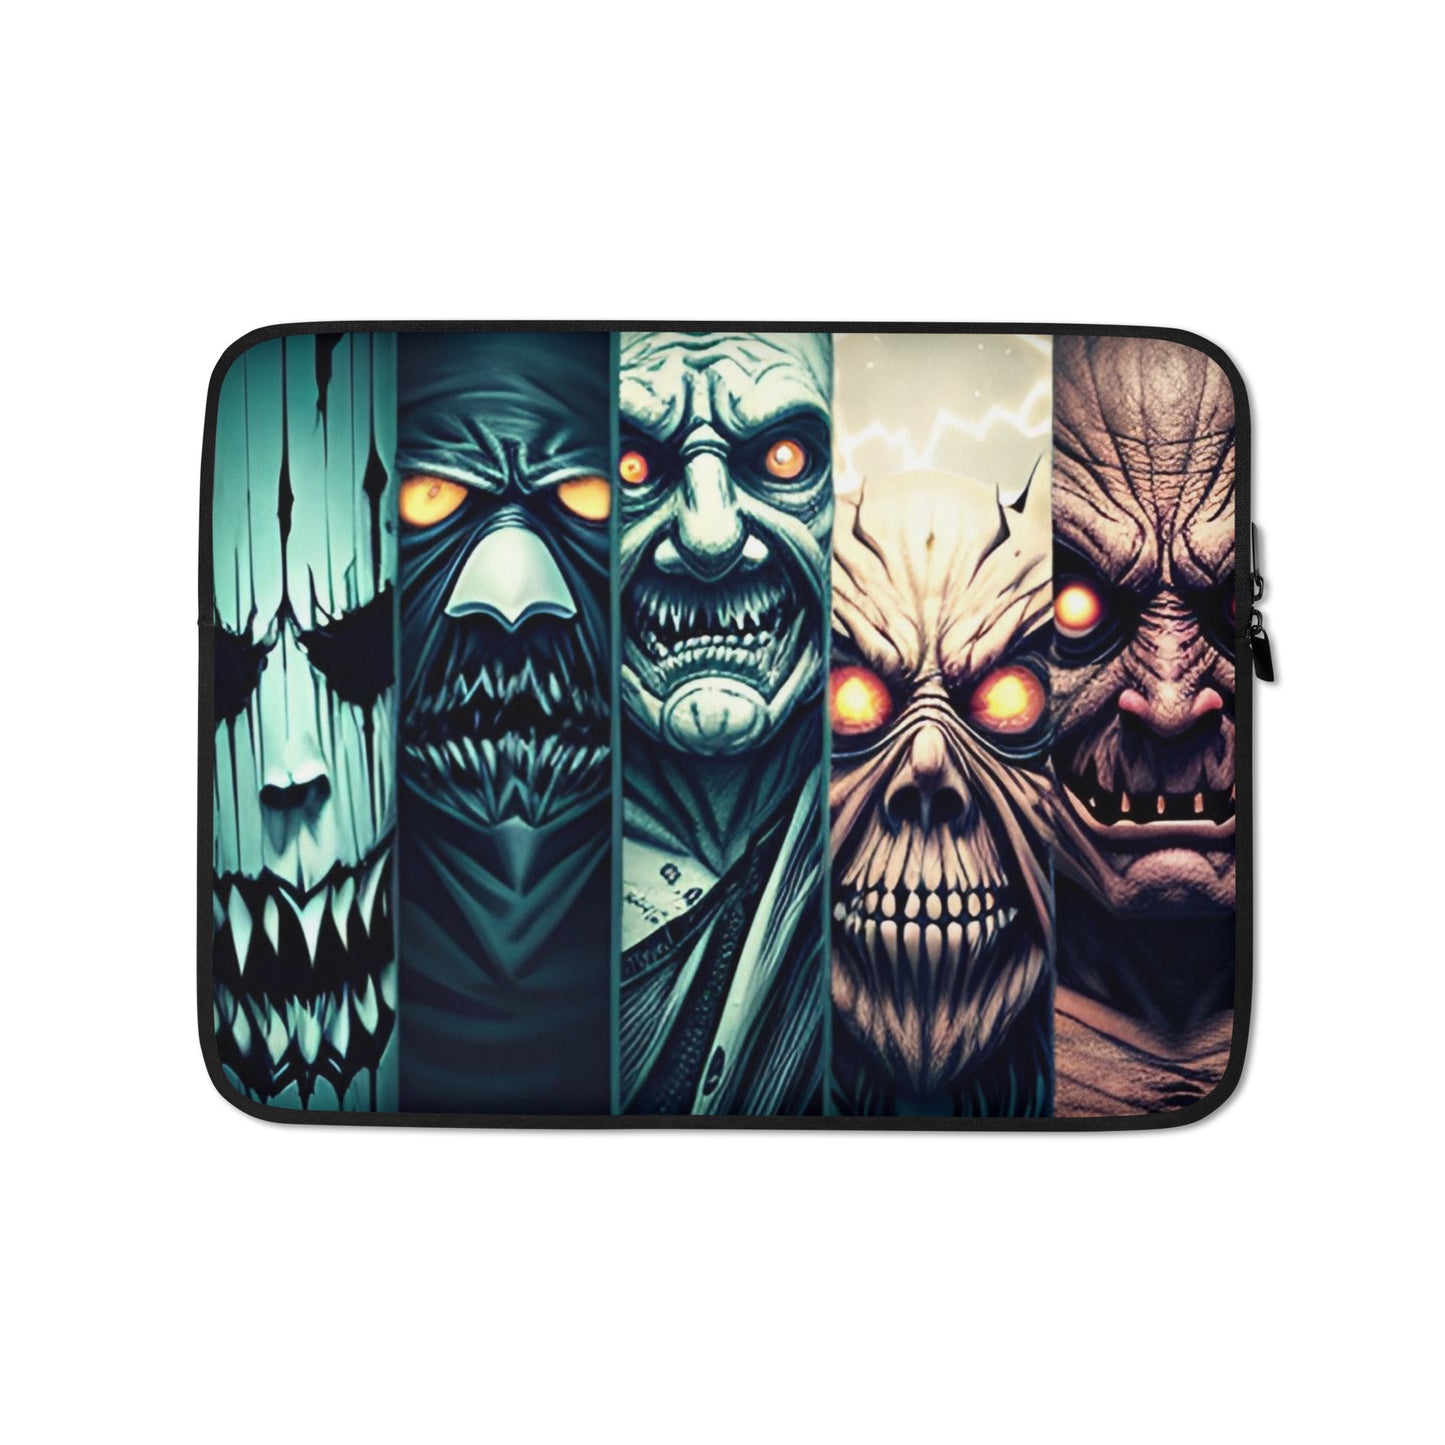 Five Faces Of Fear - Laptop Sleeve